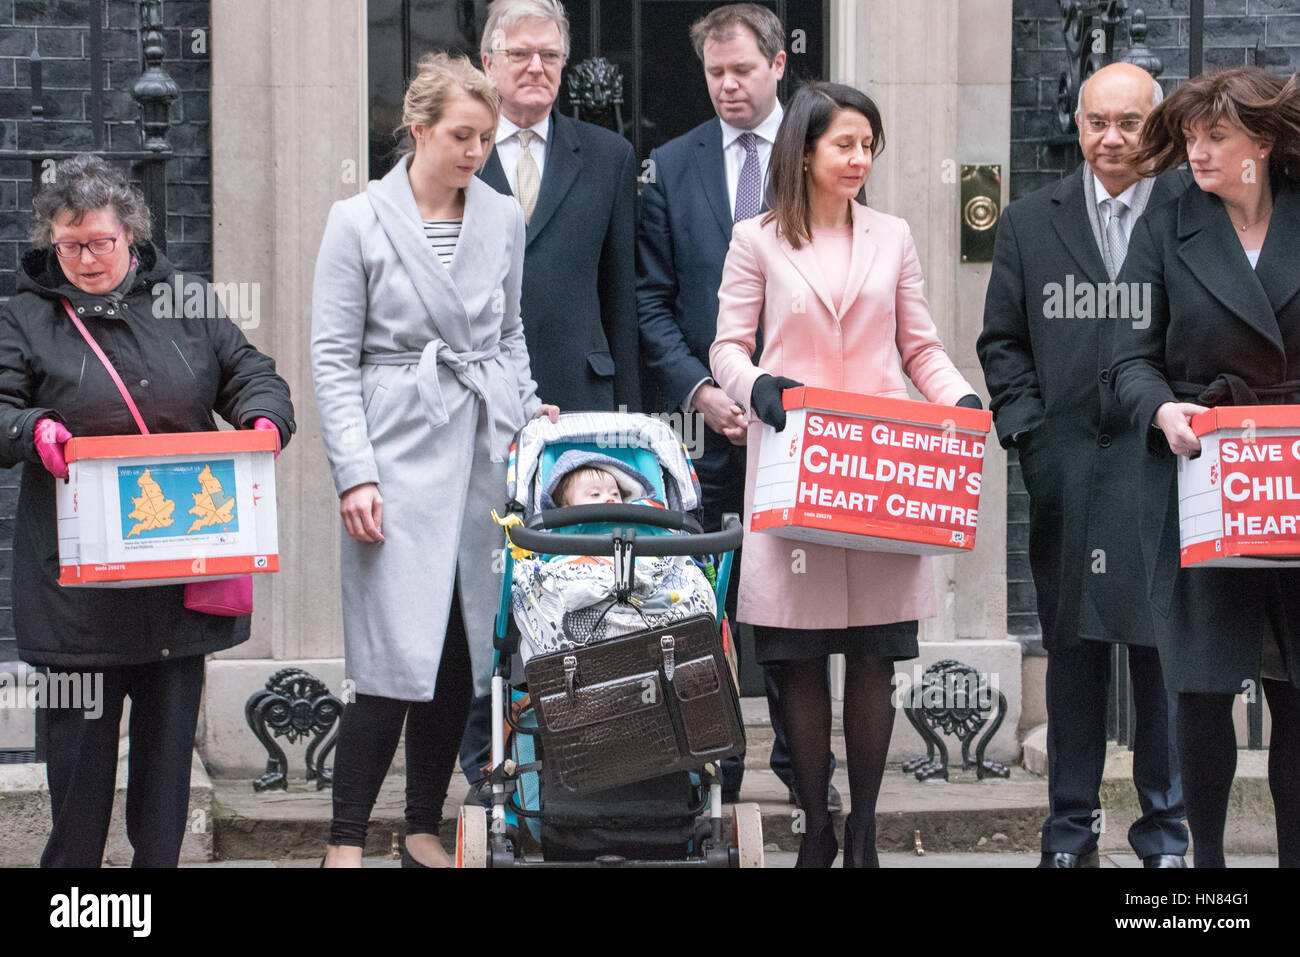 London, UK. 9th February 2017. Protesters hand a petition to 10 Downing Street against the closure of Glenfields Childrens Heart unit. MP Keith Vaz on the 2nd right of the picture and Nicky Morgan MP on the right of the picture Credit: Ian Davidson/Alamy Live News Stock Photo